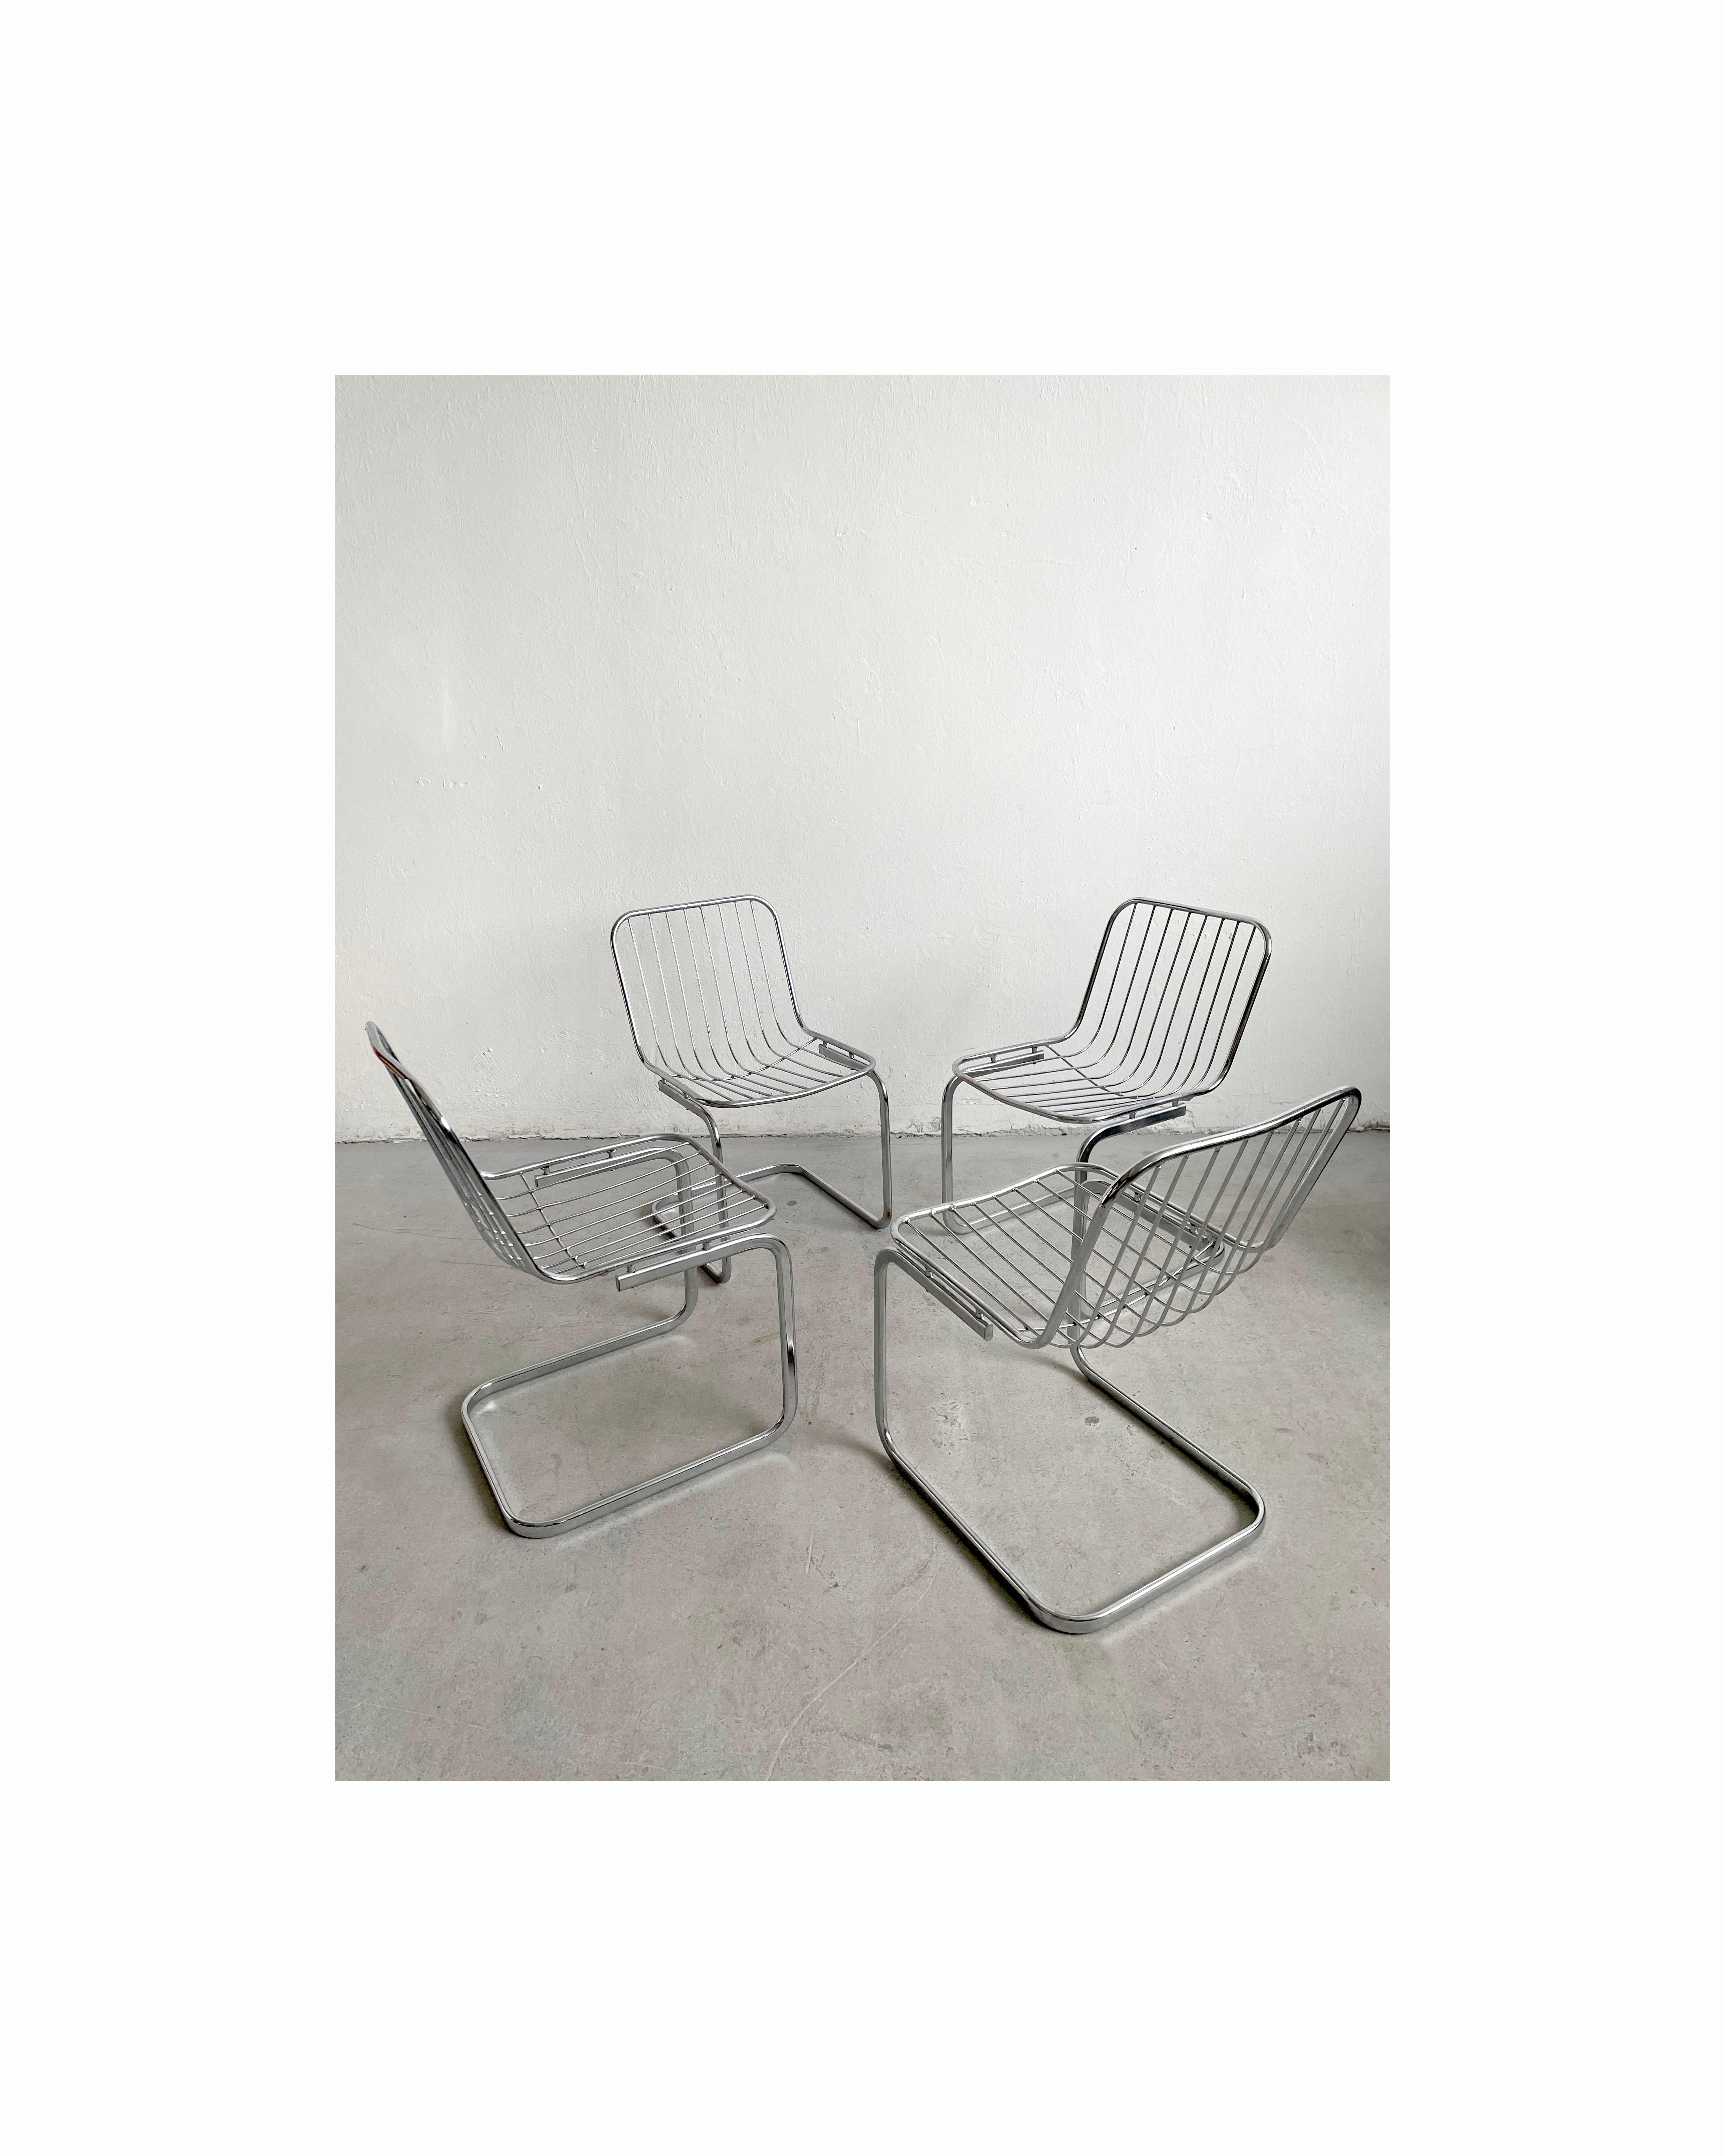 Set of 4 Italian dining chairs made by Gastone Rinaldi or made in his style, Italy 1970's - 1980's

The chairs have creme color cushions made of wool-like fabric, and they remain in a very good condition, with some small traces of wear.

The metal